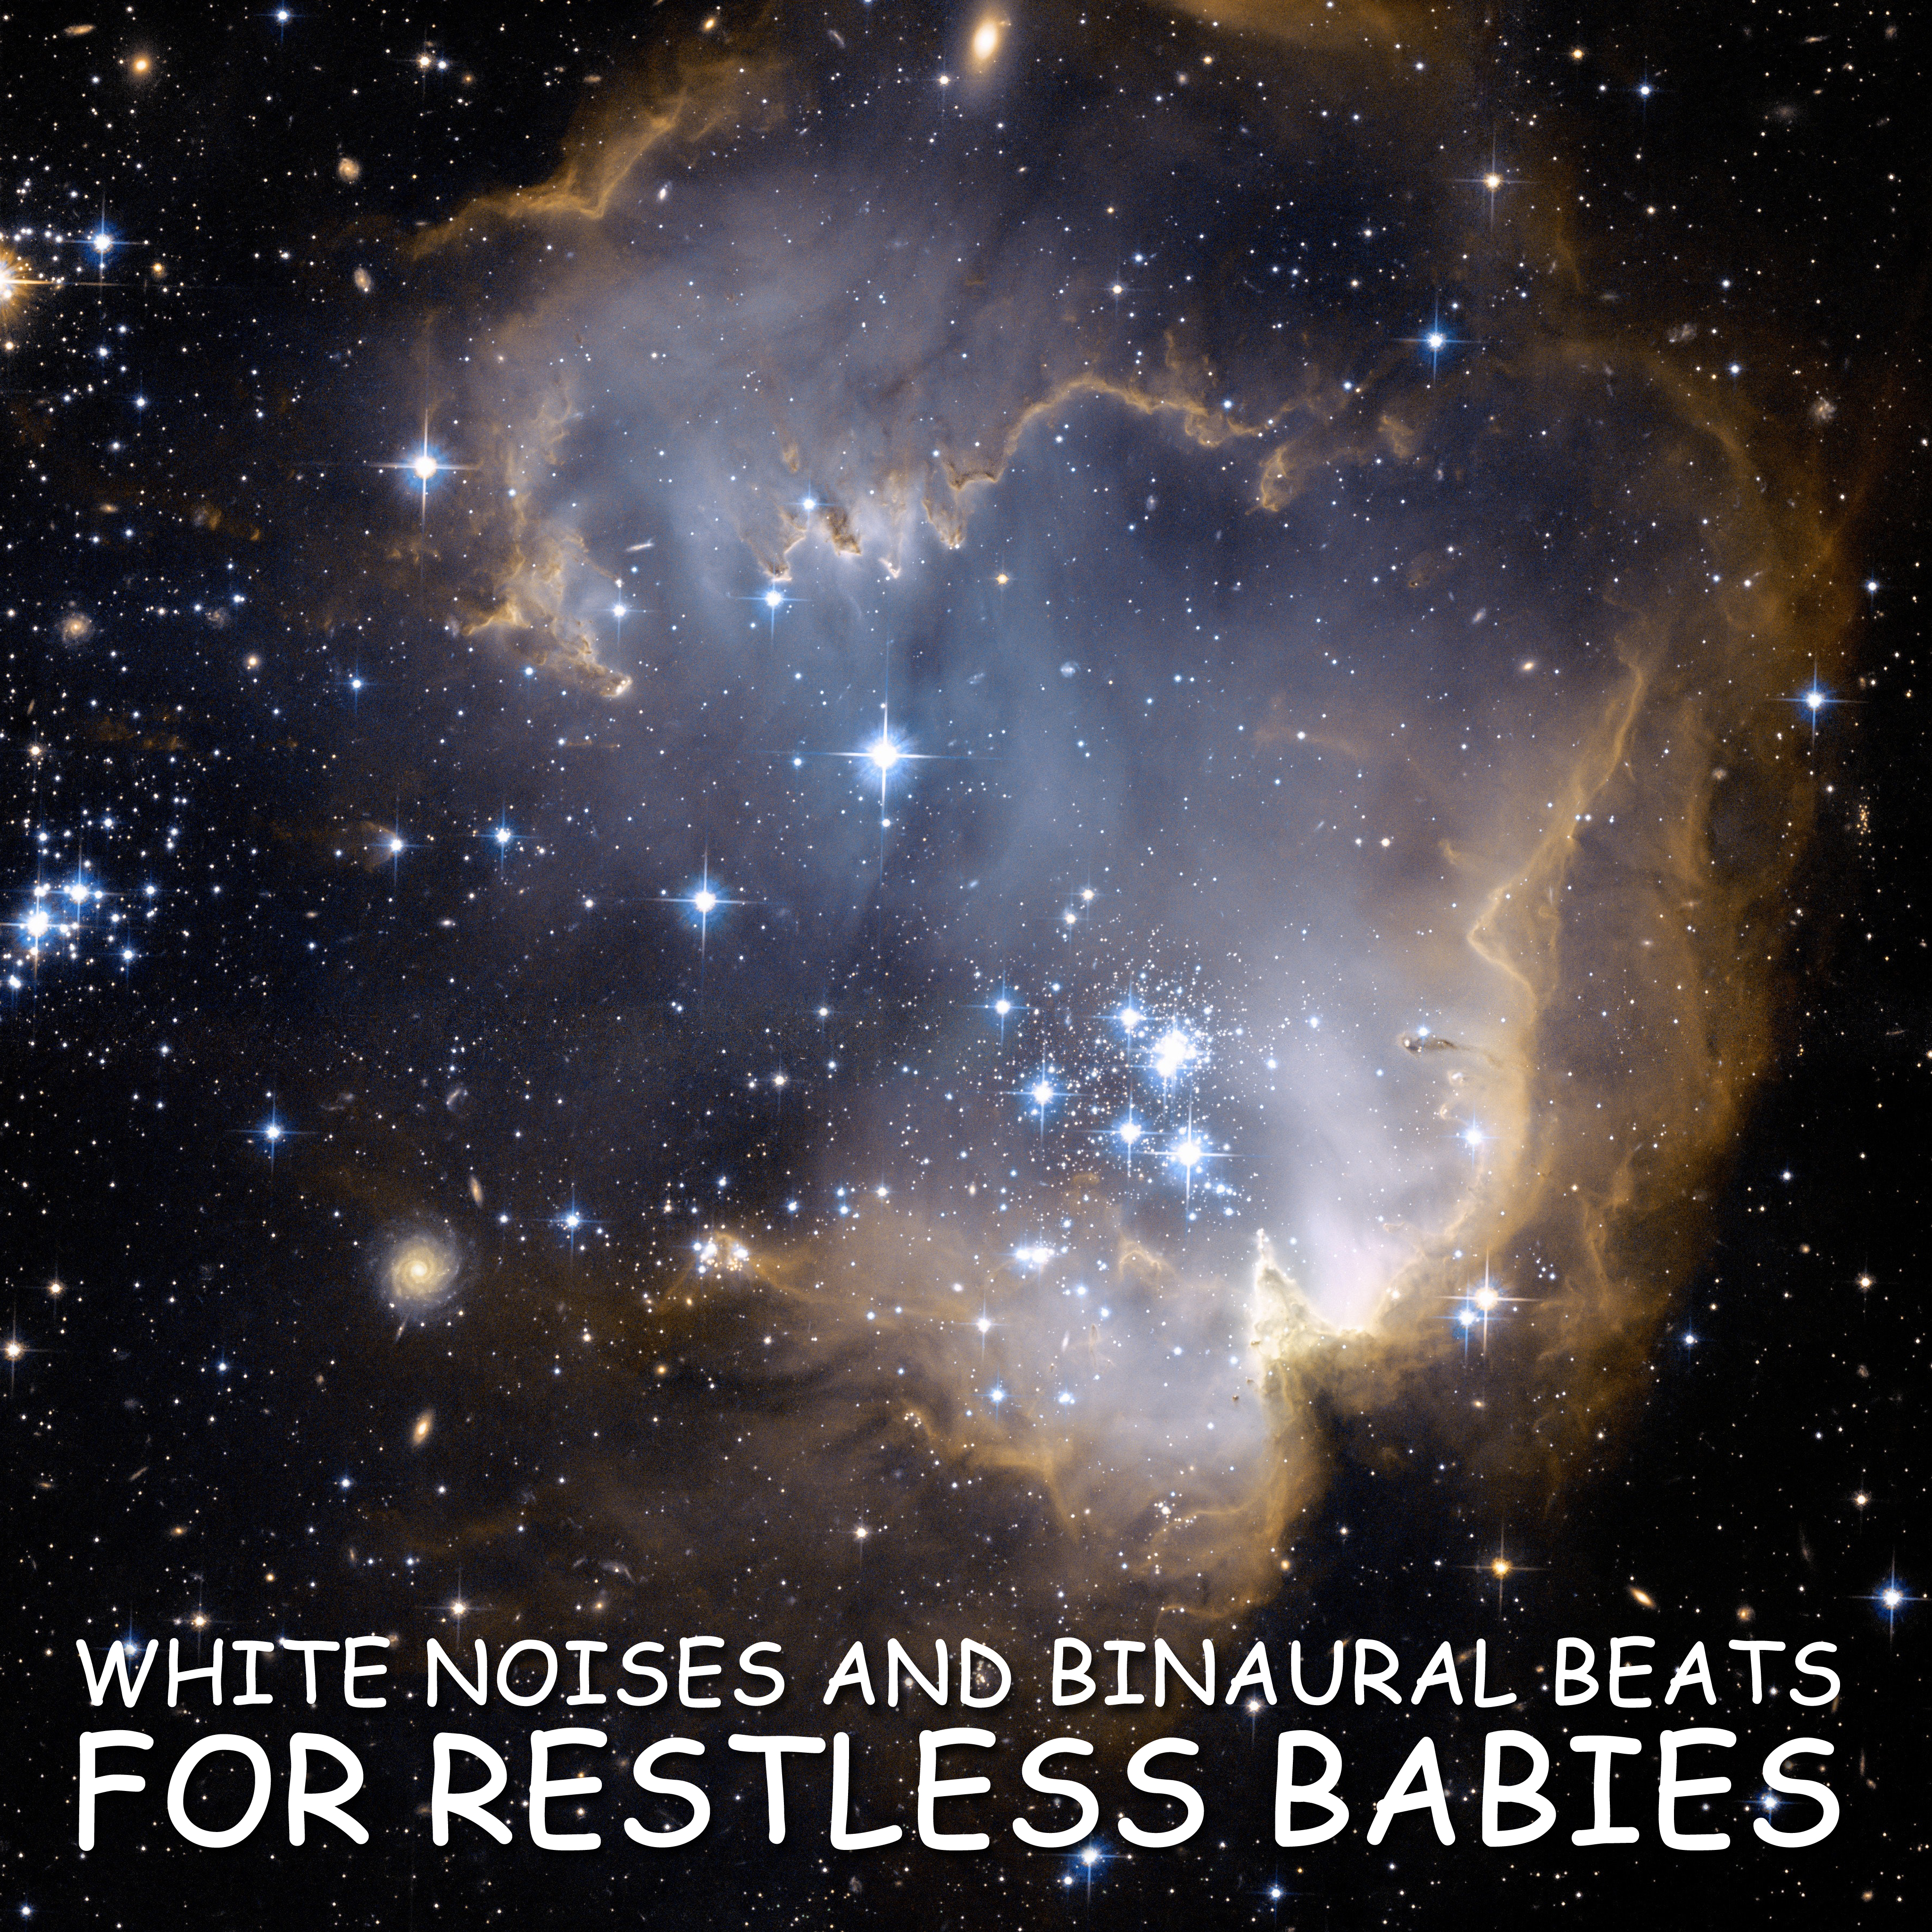 12 White Noises and Binaural Beats for Restless Babies